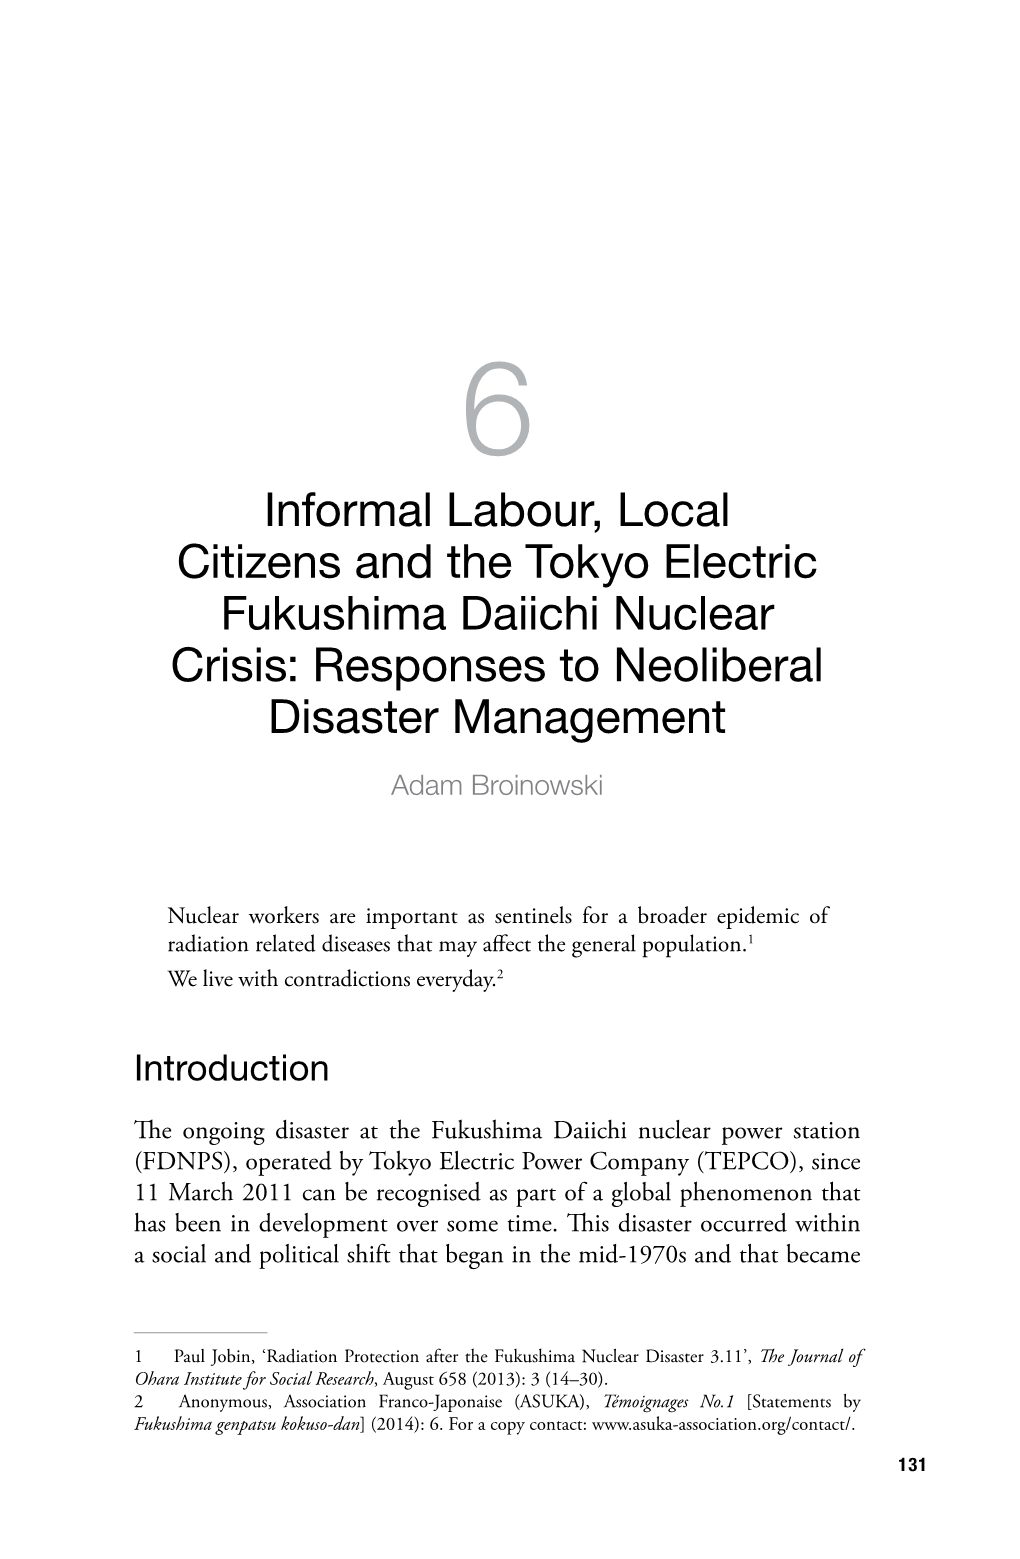 Informal Labour, Local Citizens and the Tokyo Electric Fukushima Daiichi Nuclear Crisis: Responses to Neoliberal Disaster Management Adam Broinowski